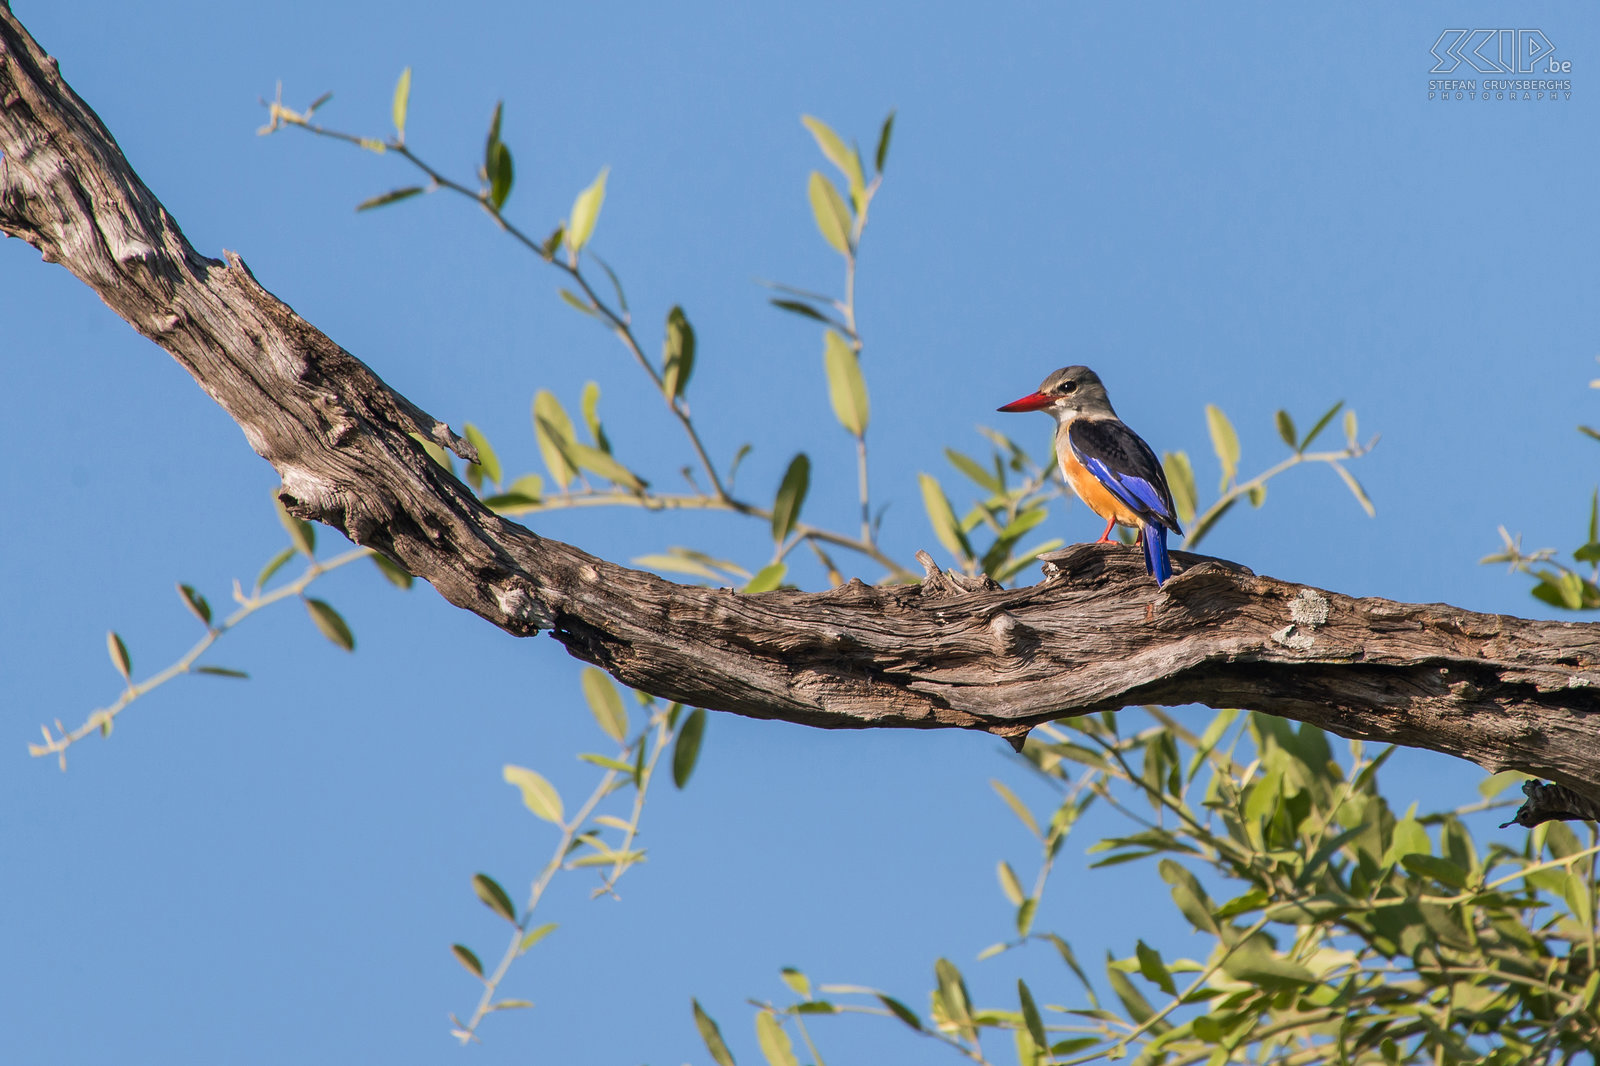 South Luangwa - Grey-headed kingfisher The grey-headed kingfisher (Halcyon leucocephala) can be found in areas with scrub and woodland. They are often found near water but unlike most kingfishers they do not fish. They mainly feed insects and even small lizards. Stefan Cruysberghs